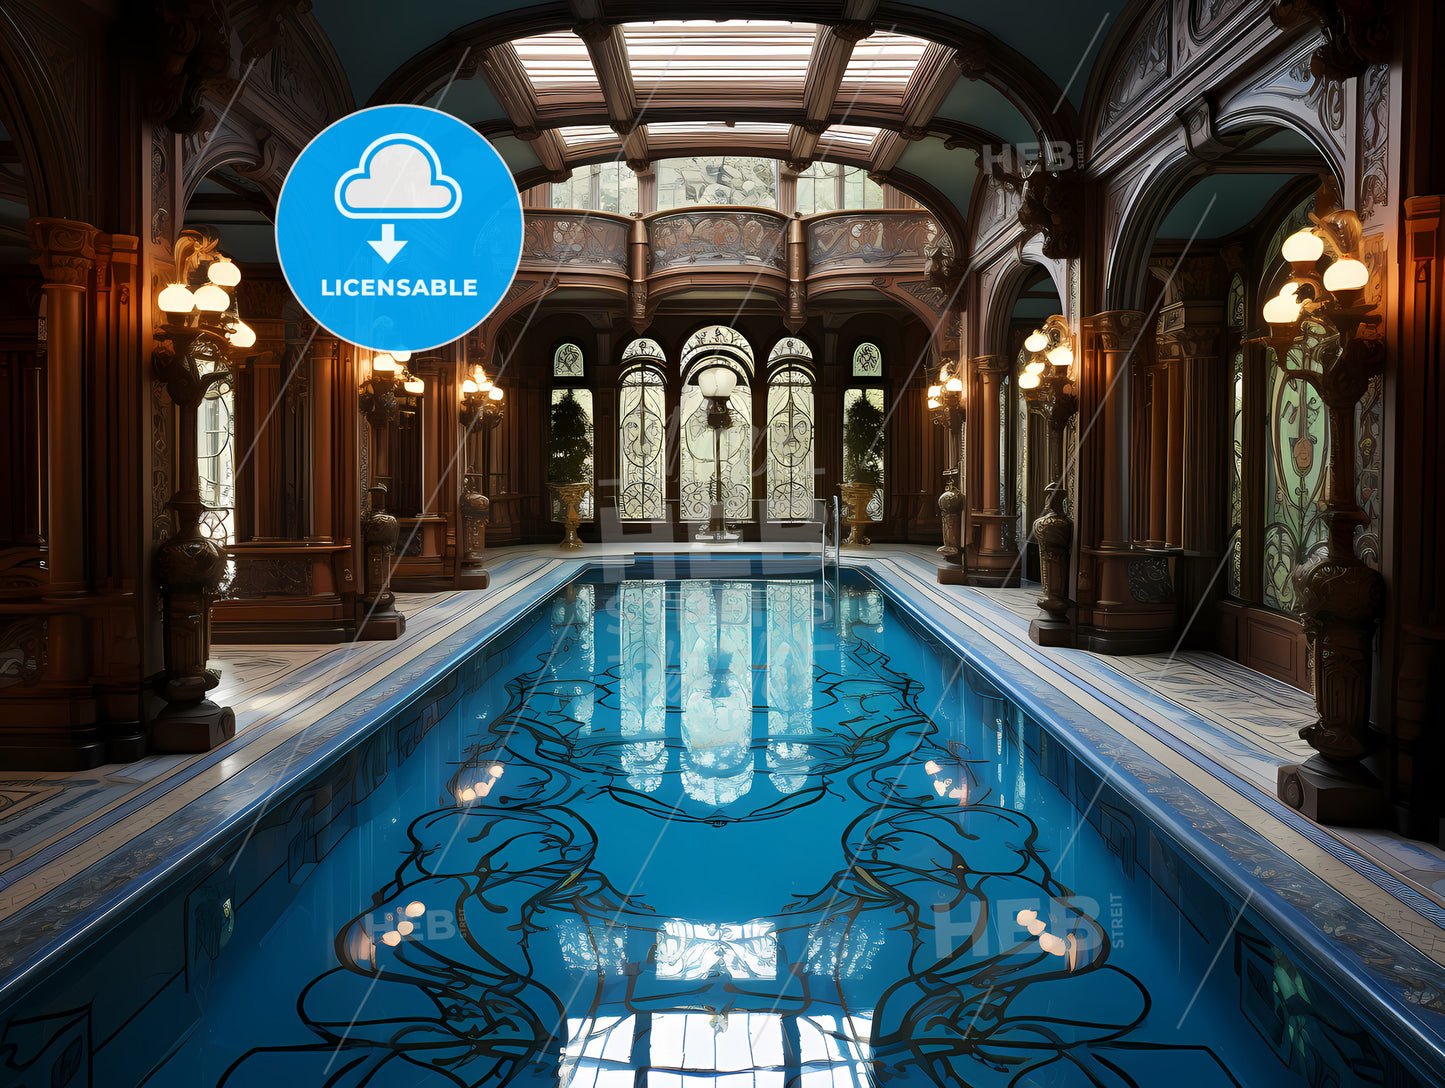 Indoor Swimming Pool With Ornate Walls And Arched Windows